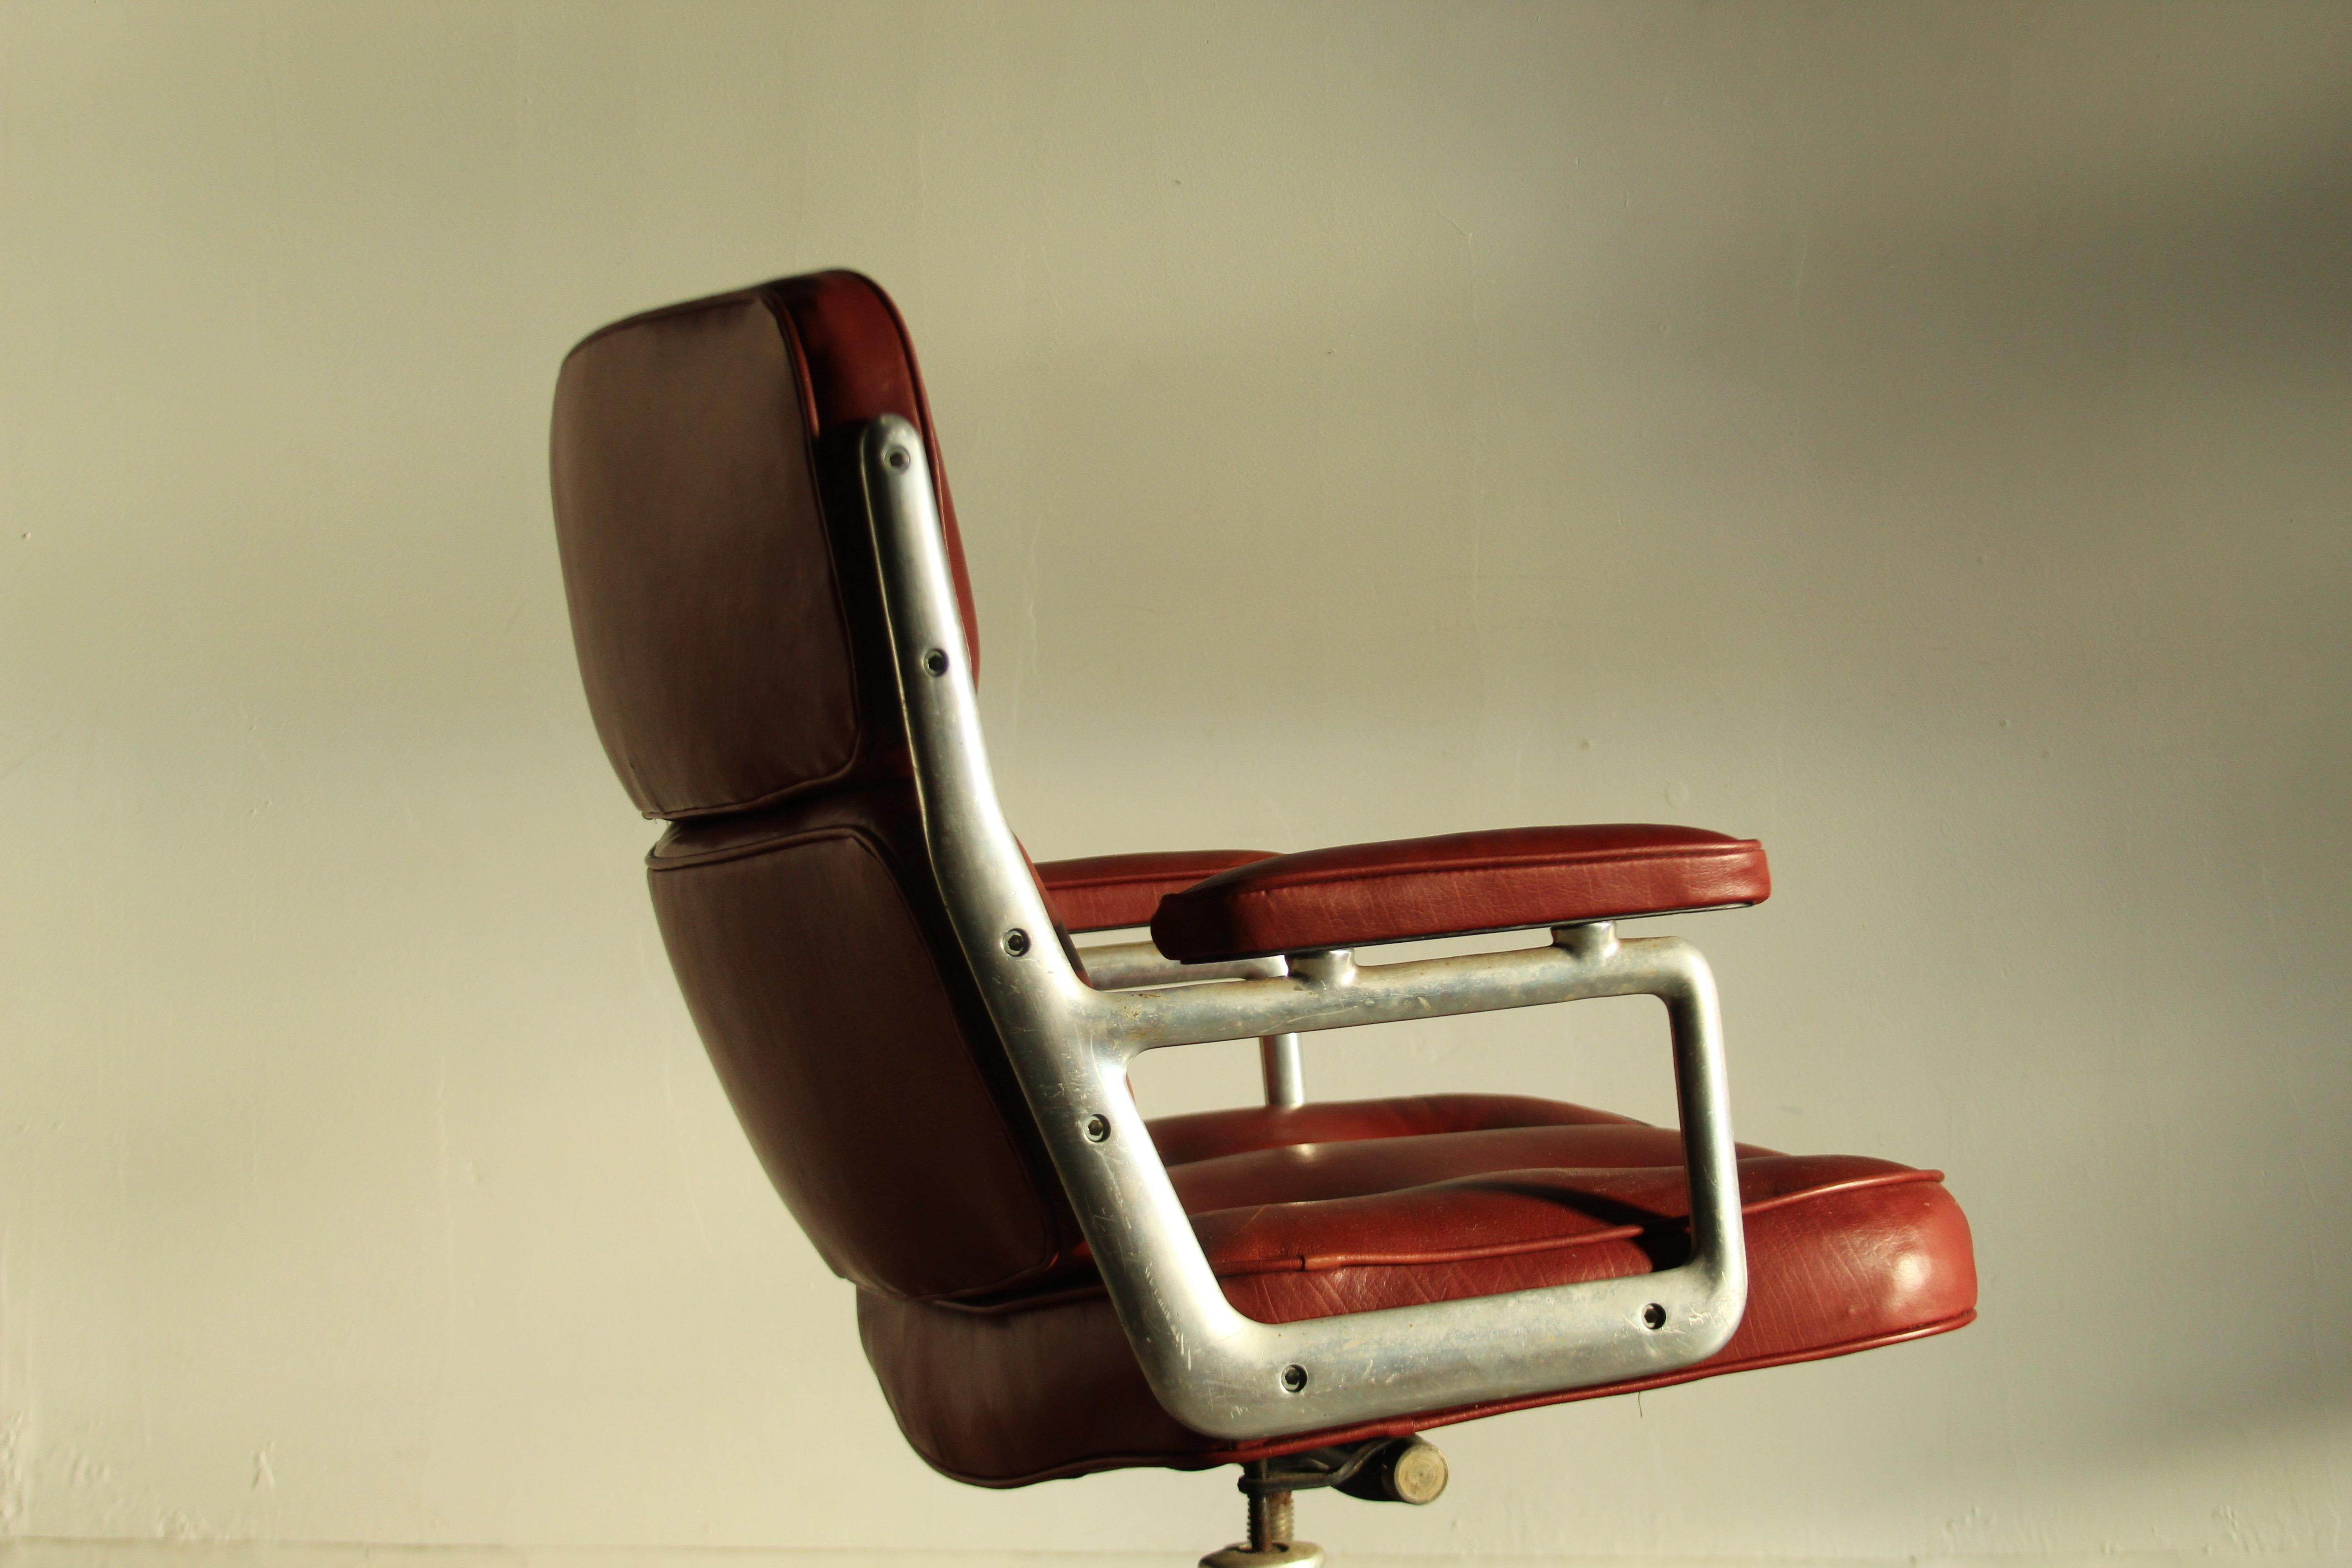 American Vintage 1970s Herman Miller Eames Time Life Executive Chair in Calfskin Leather